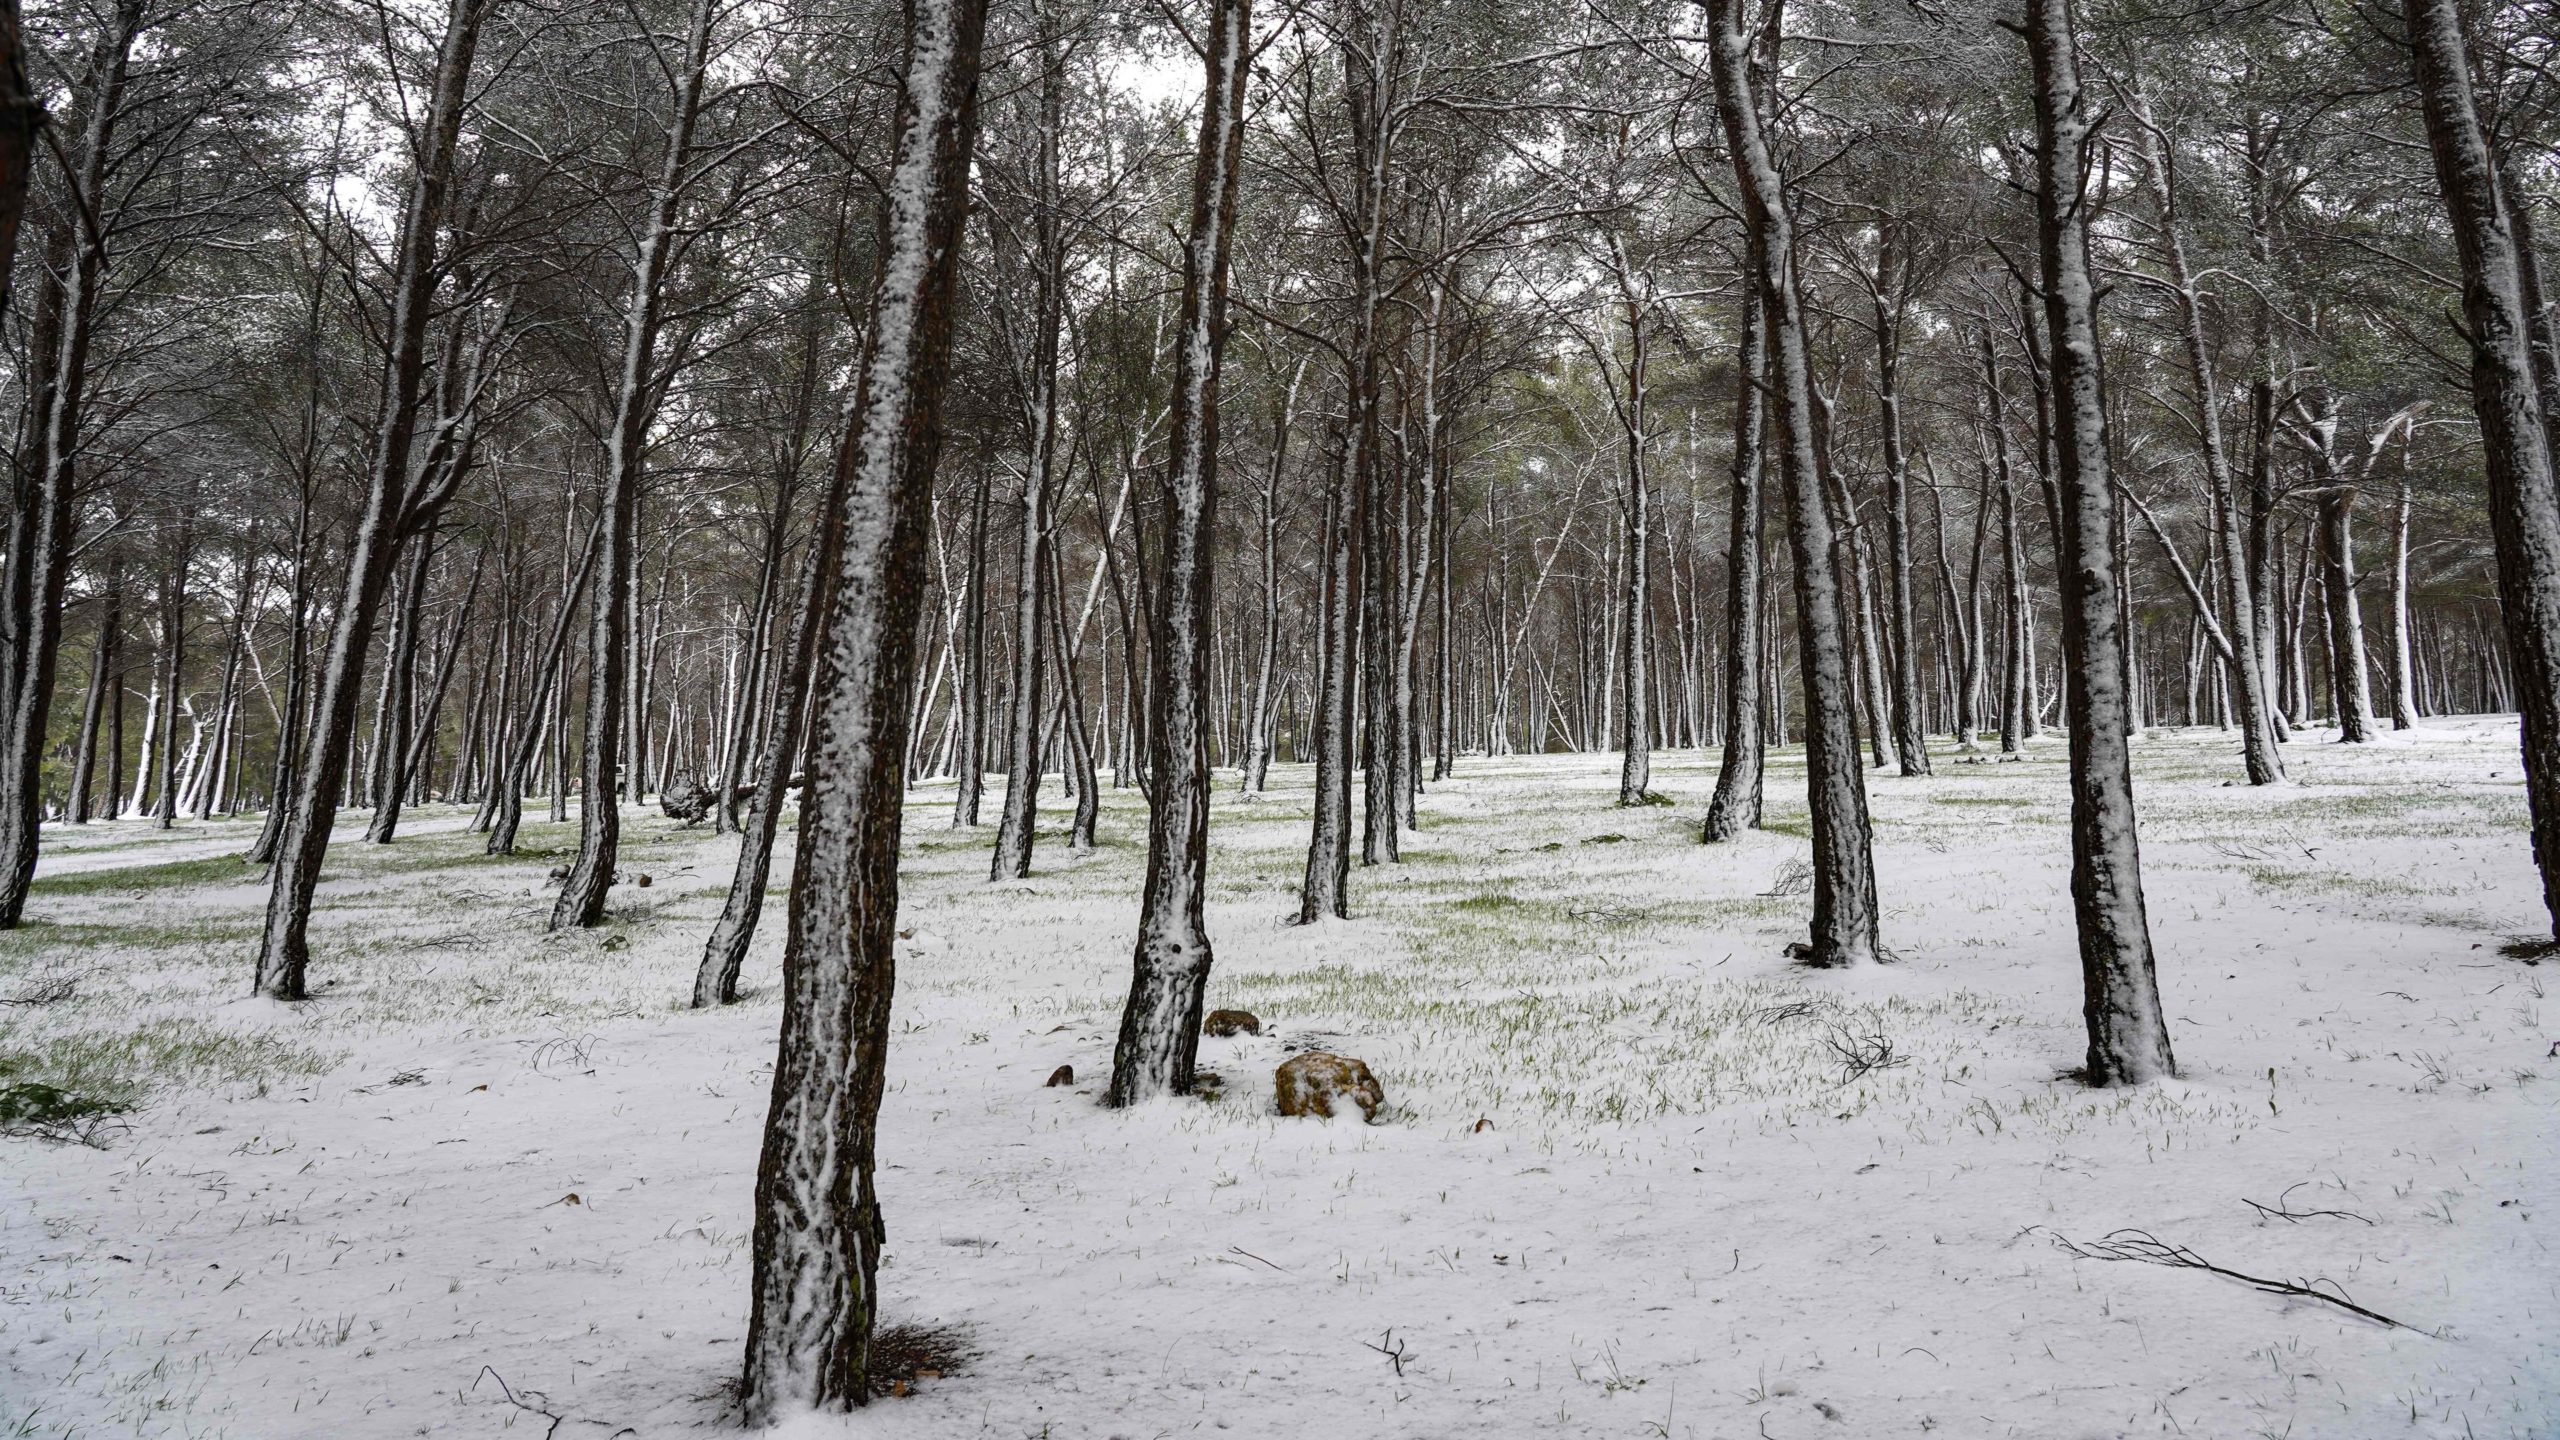 This picture taken on February 16, 2021 shows a view of a snowy forest area in the Sidi al-Hamri region of Libya's eastern Jebel Akhdar (Green Mountain) upland region. (Photo: AFP, Getty Images)